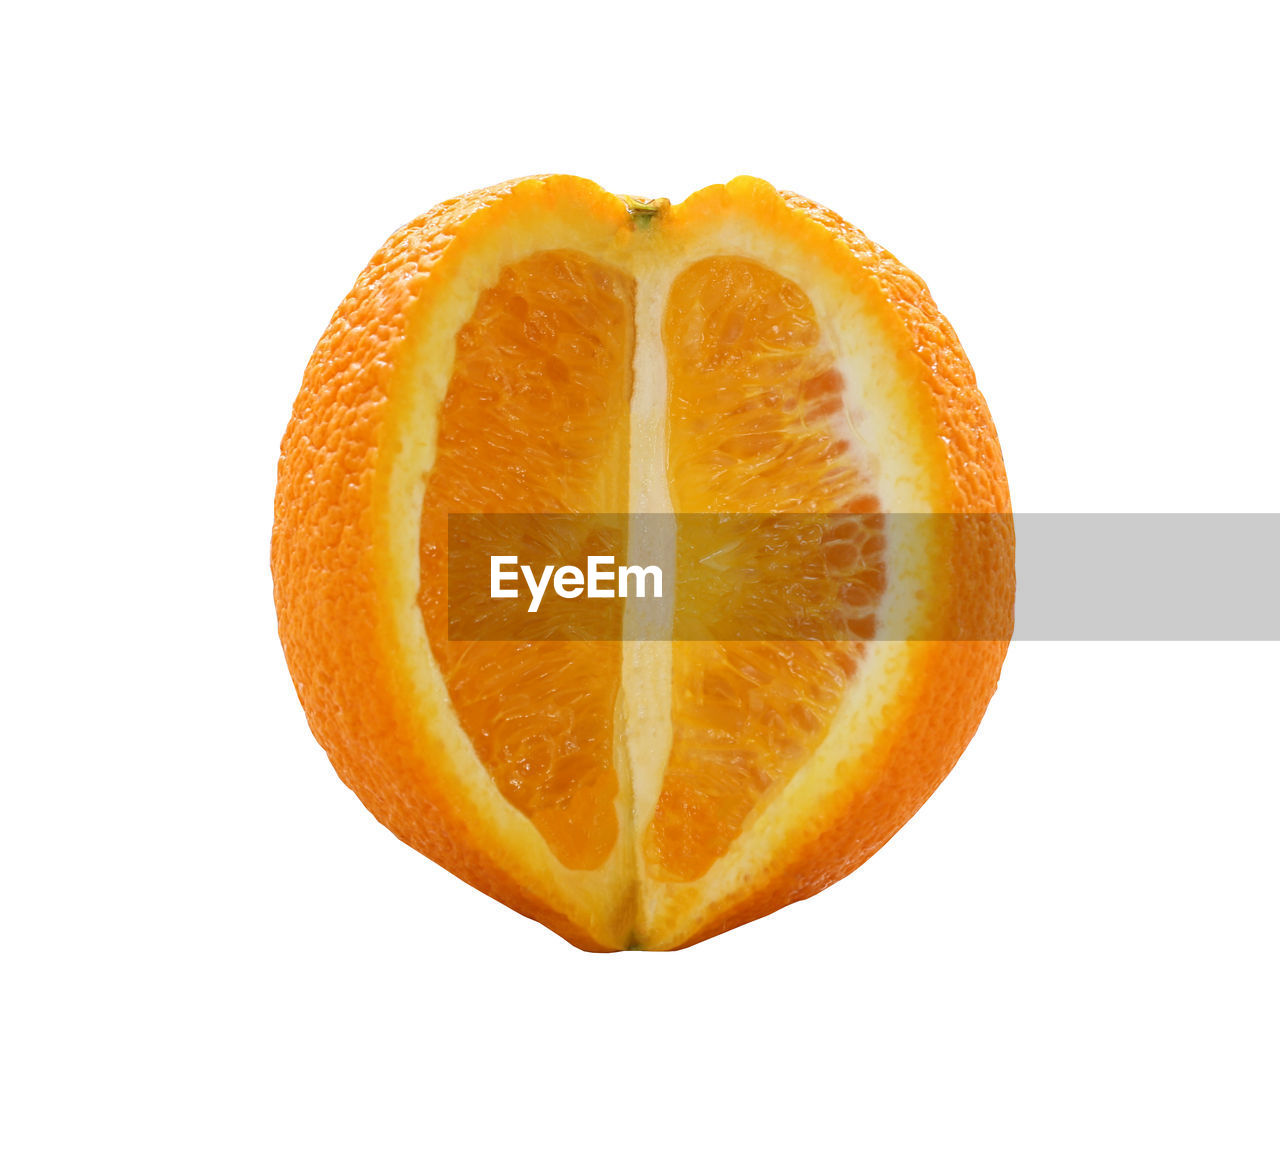 food and drink, food, healthy eating, fruit, freshness, plant, wellbeing, orange color, white background, cut out, produce, studio shot, citrus fruit, orange, slice, cross section, indoors, close-up, no people, citrus, ripe, juicy, tangerine, single object, clementine, organic